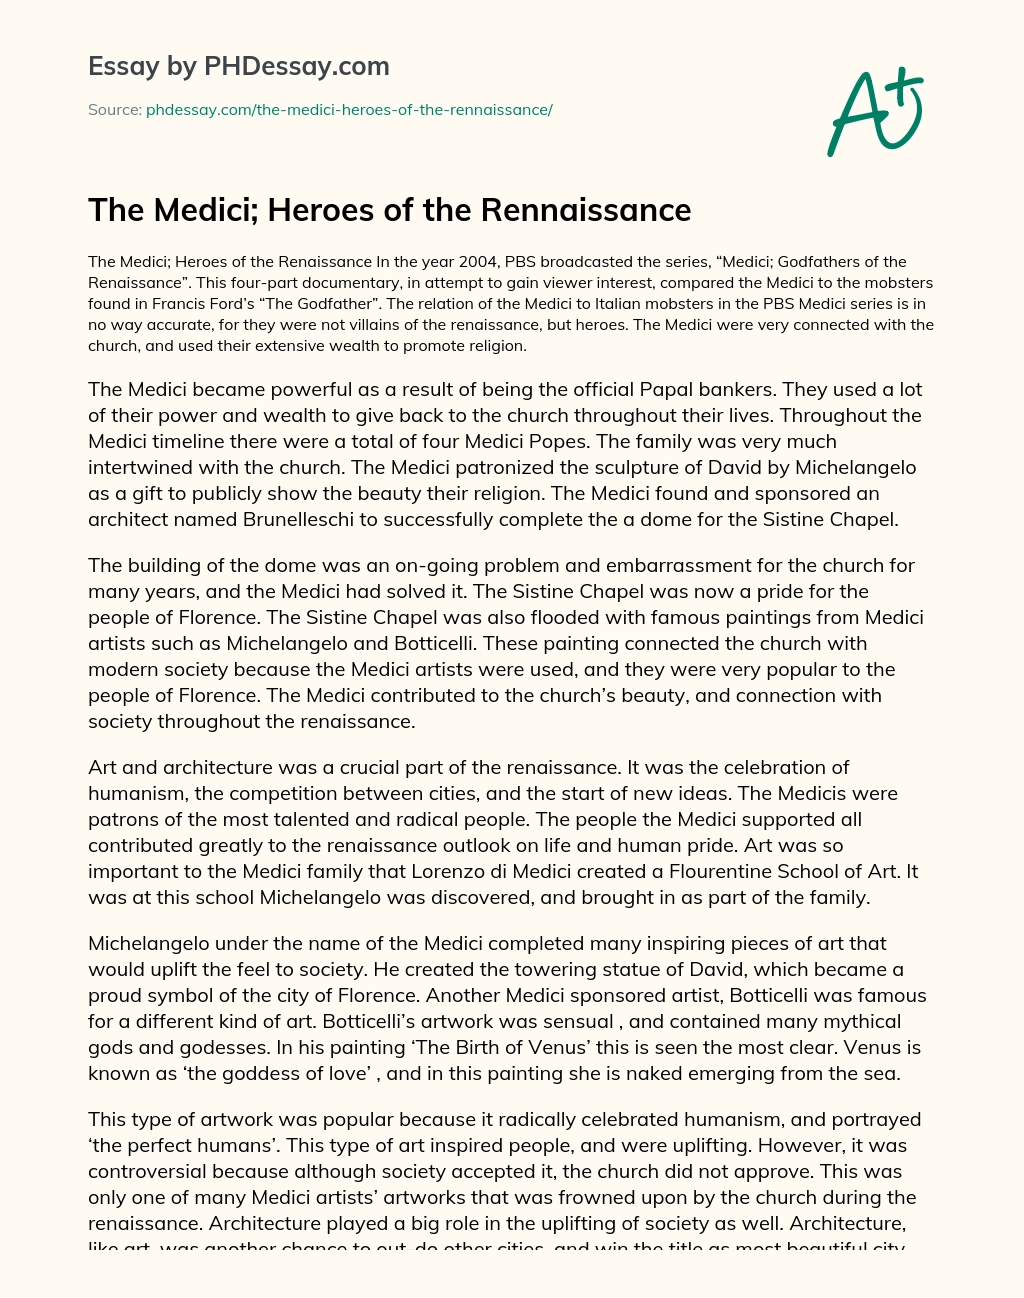 The Medici; Heroes of the Rennaissance essay